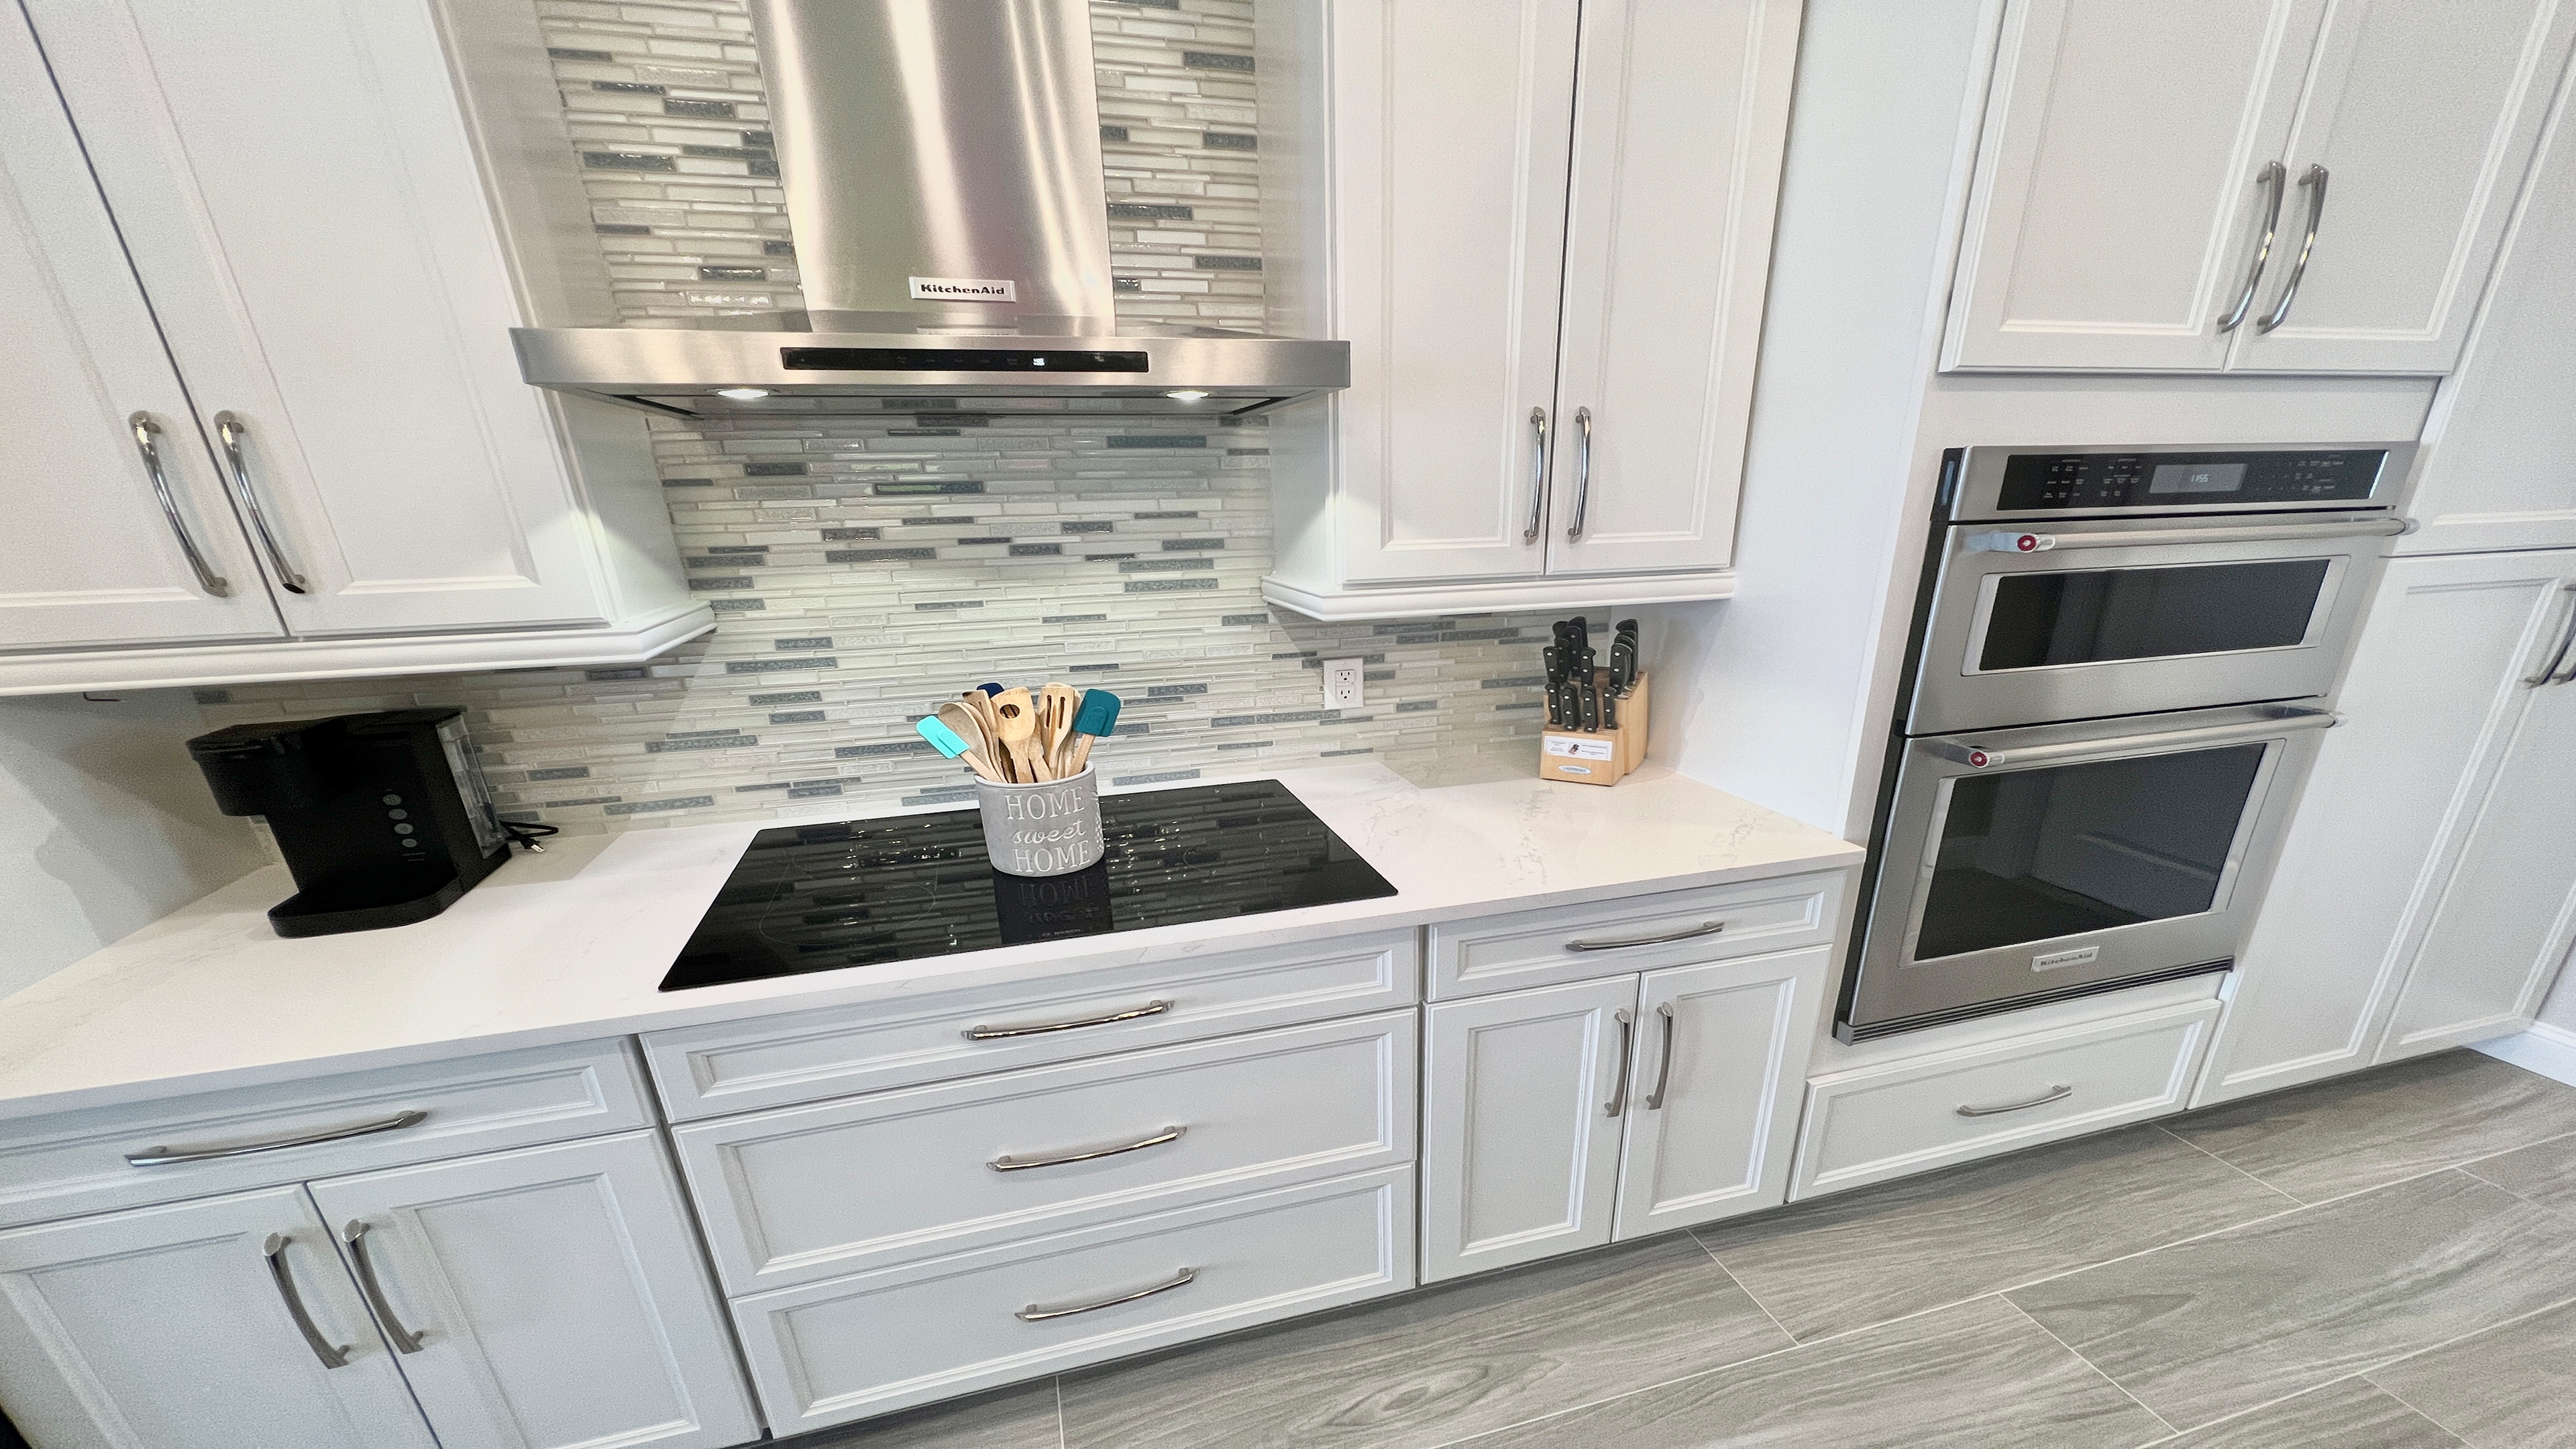 Granit counter tops and stainless steal appliances in the kitchen